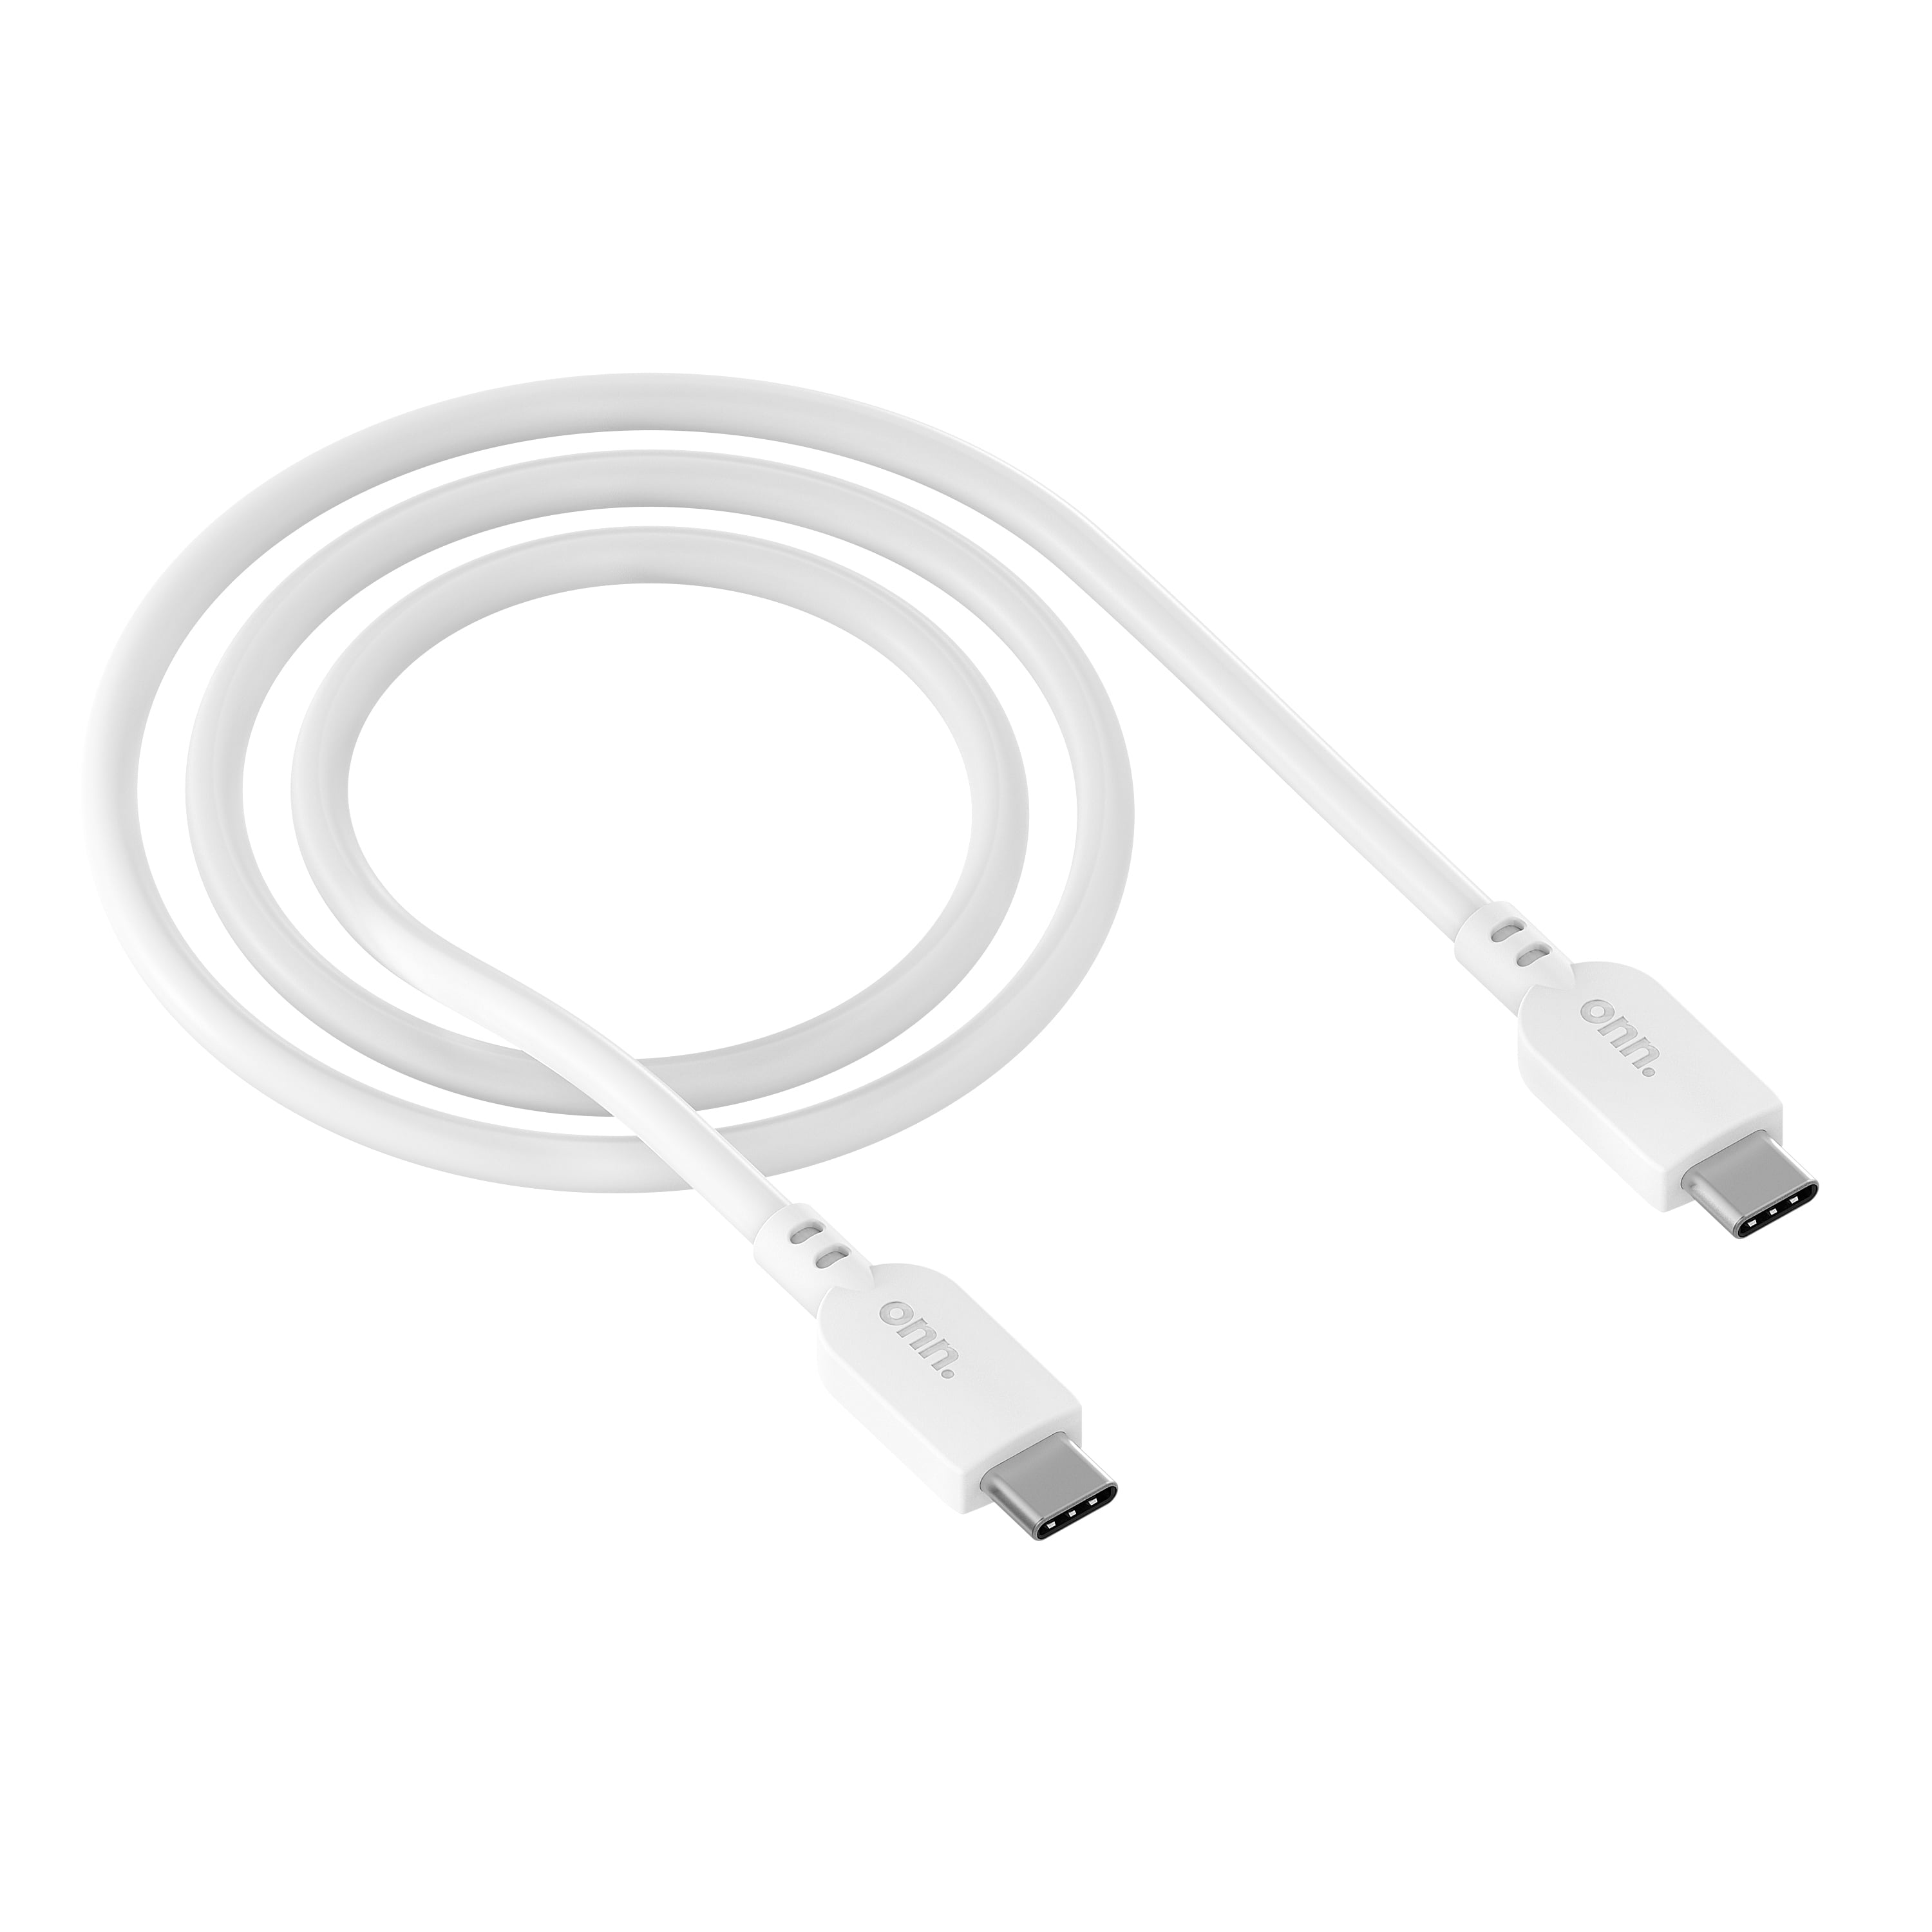 onn. 10' USB-C to USB-C Cable, White